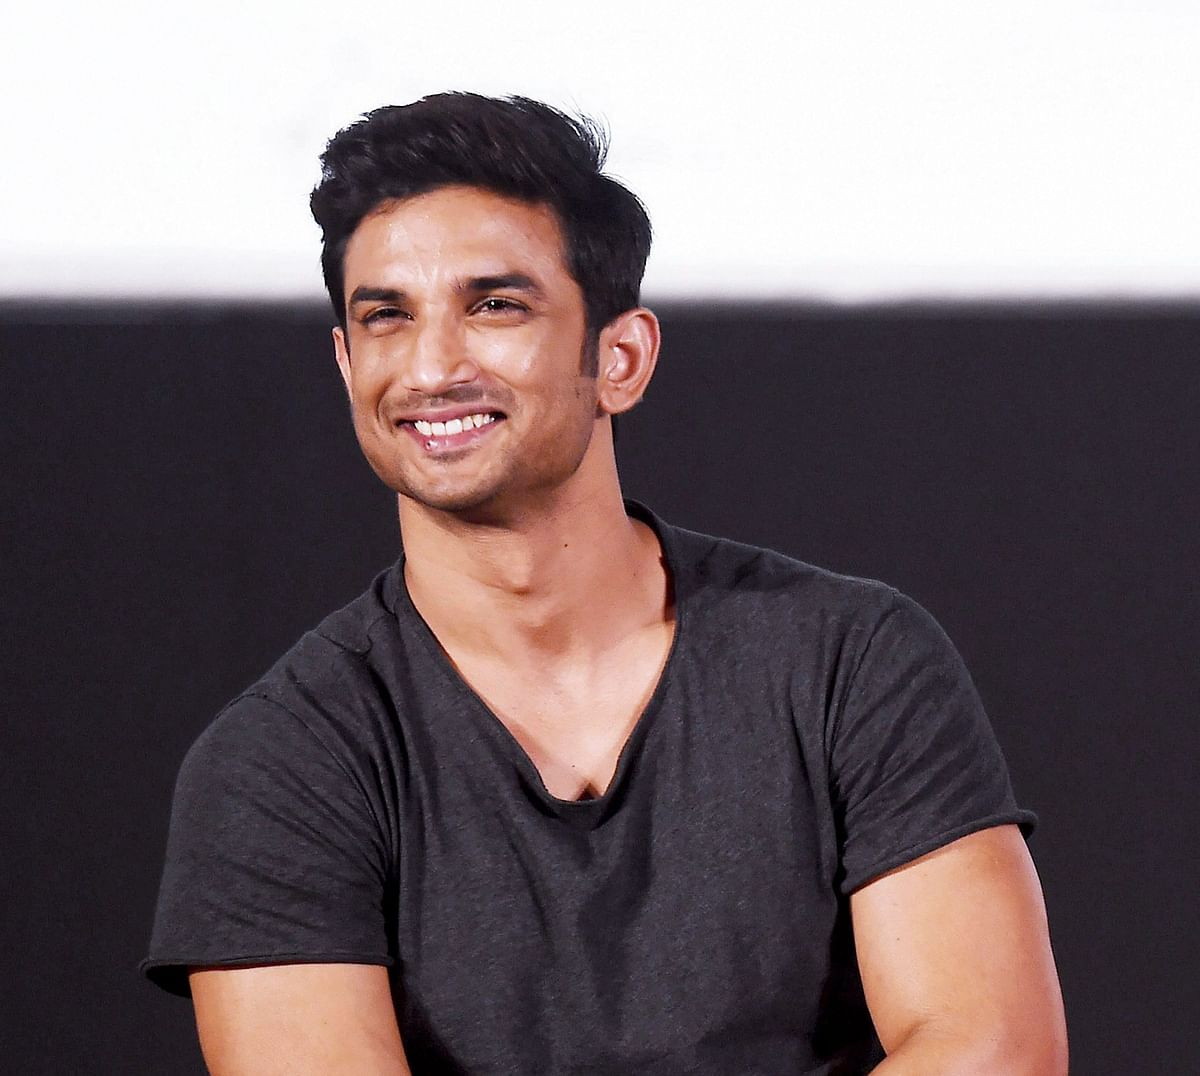 Sushant Singh Rajput | On June 14, the 34-year-old star of